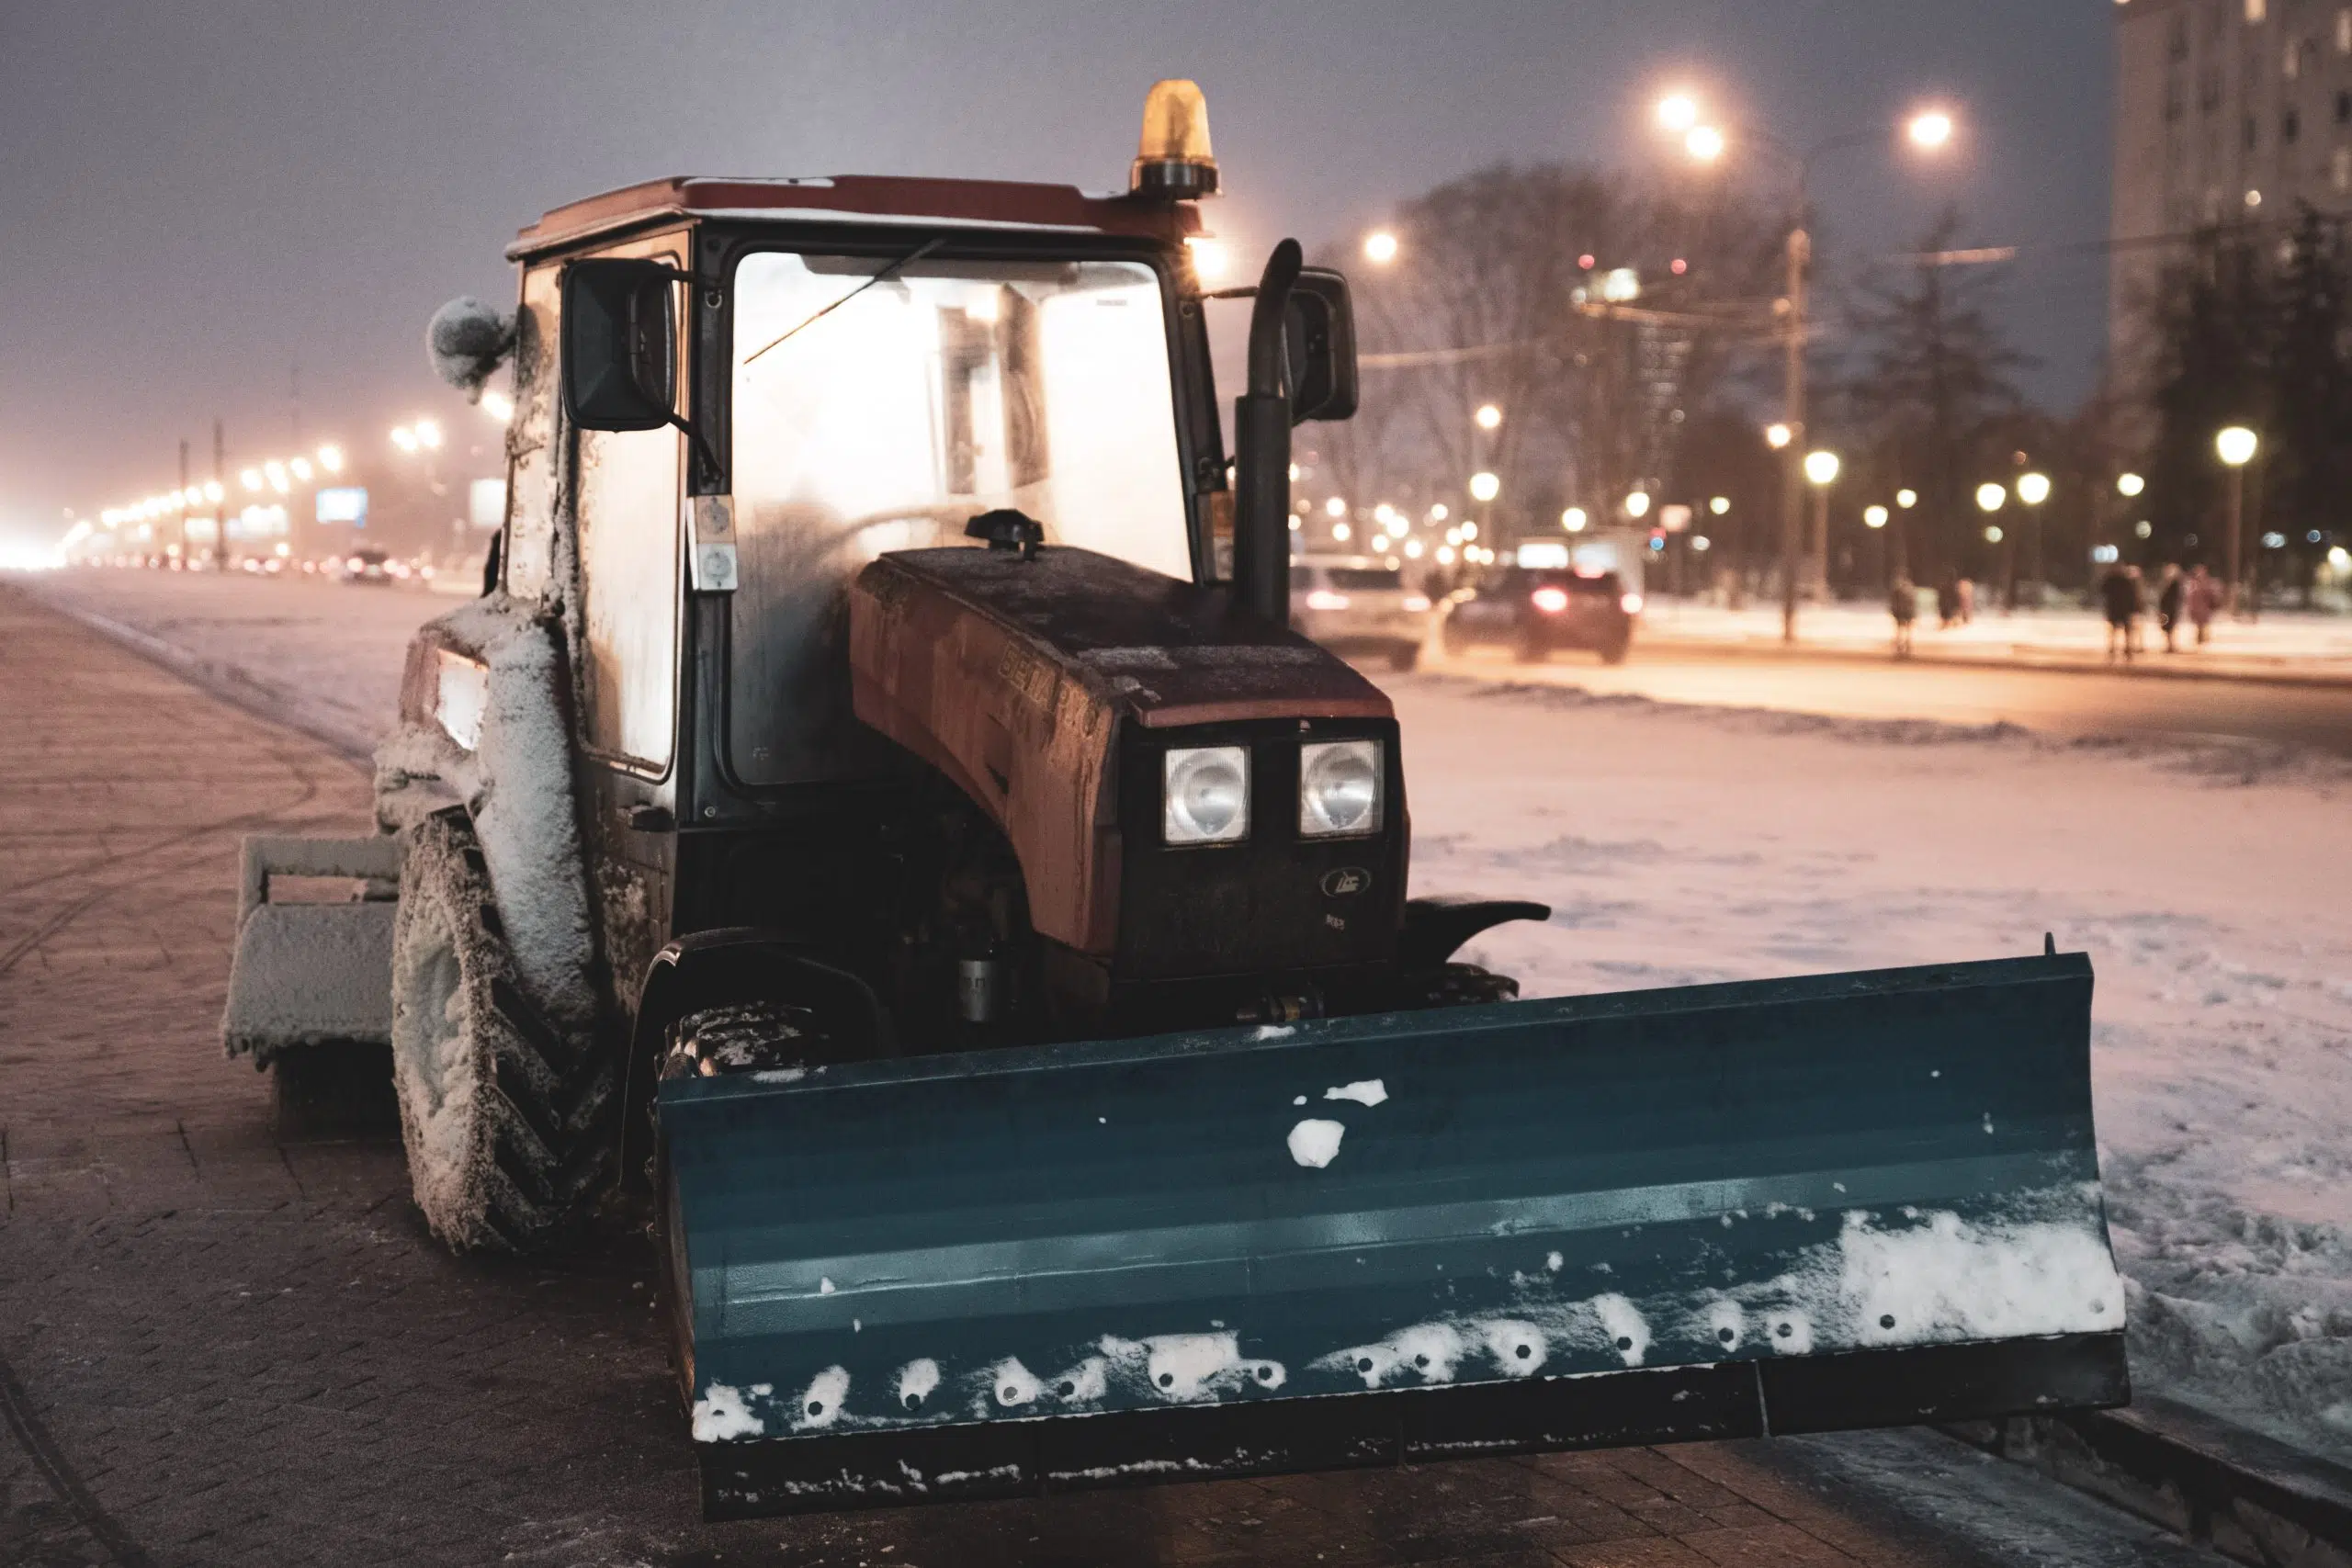 The Etiquette of Meeting a Snowplow in a Parking Lot